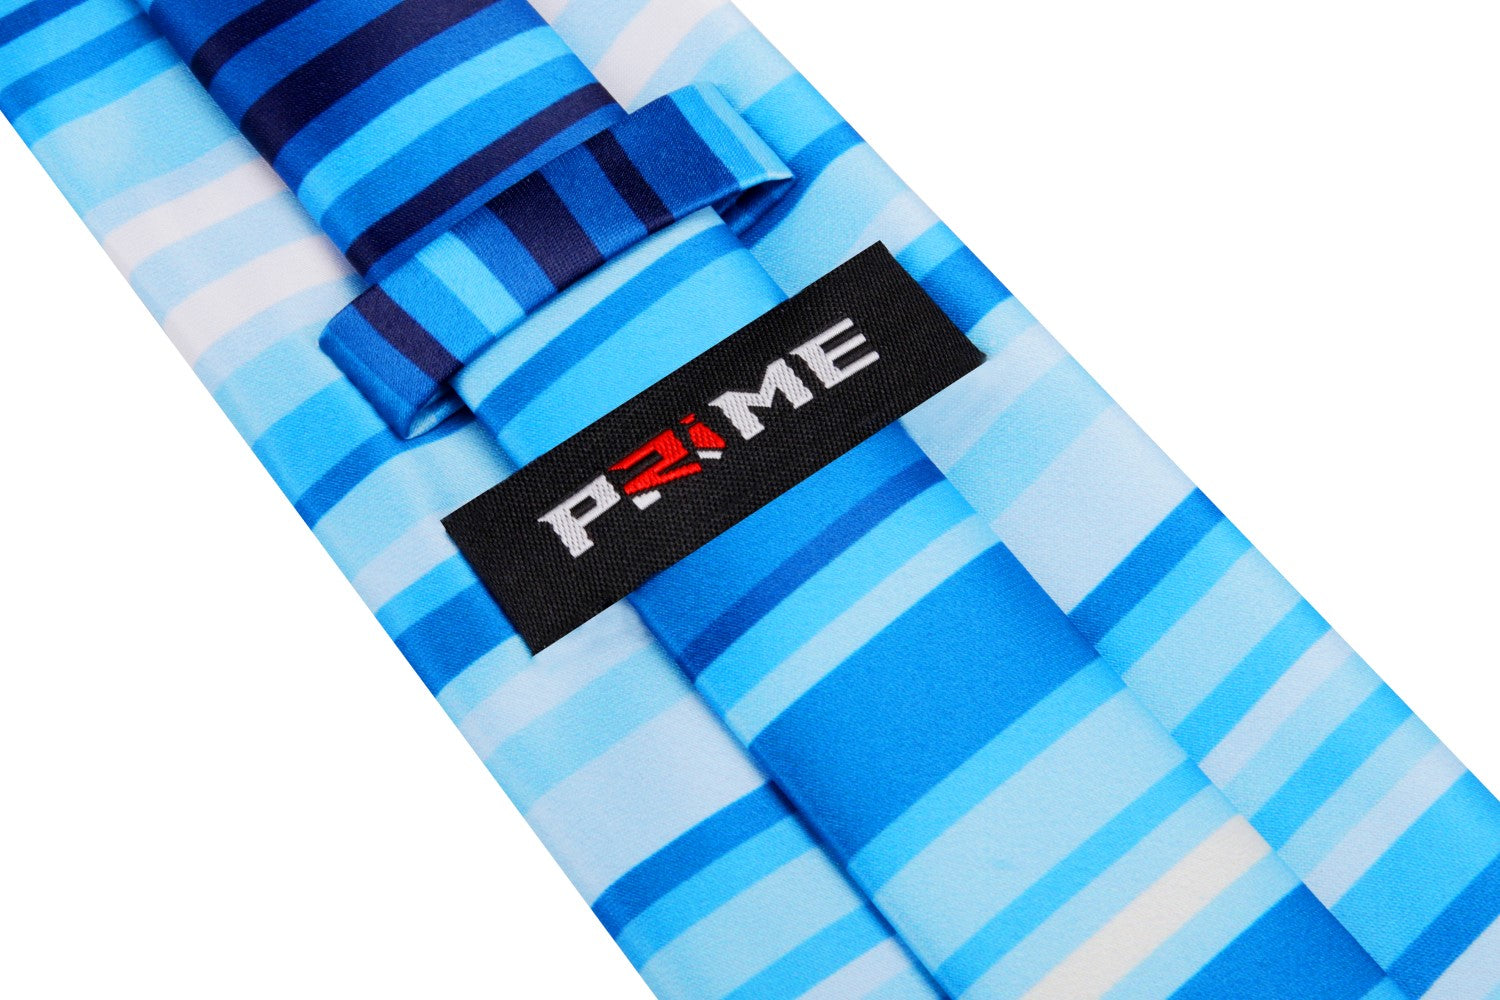  Shades of Blue and Red Gradient Tie Logo